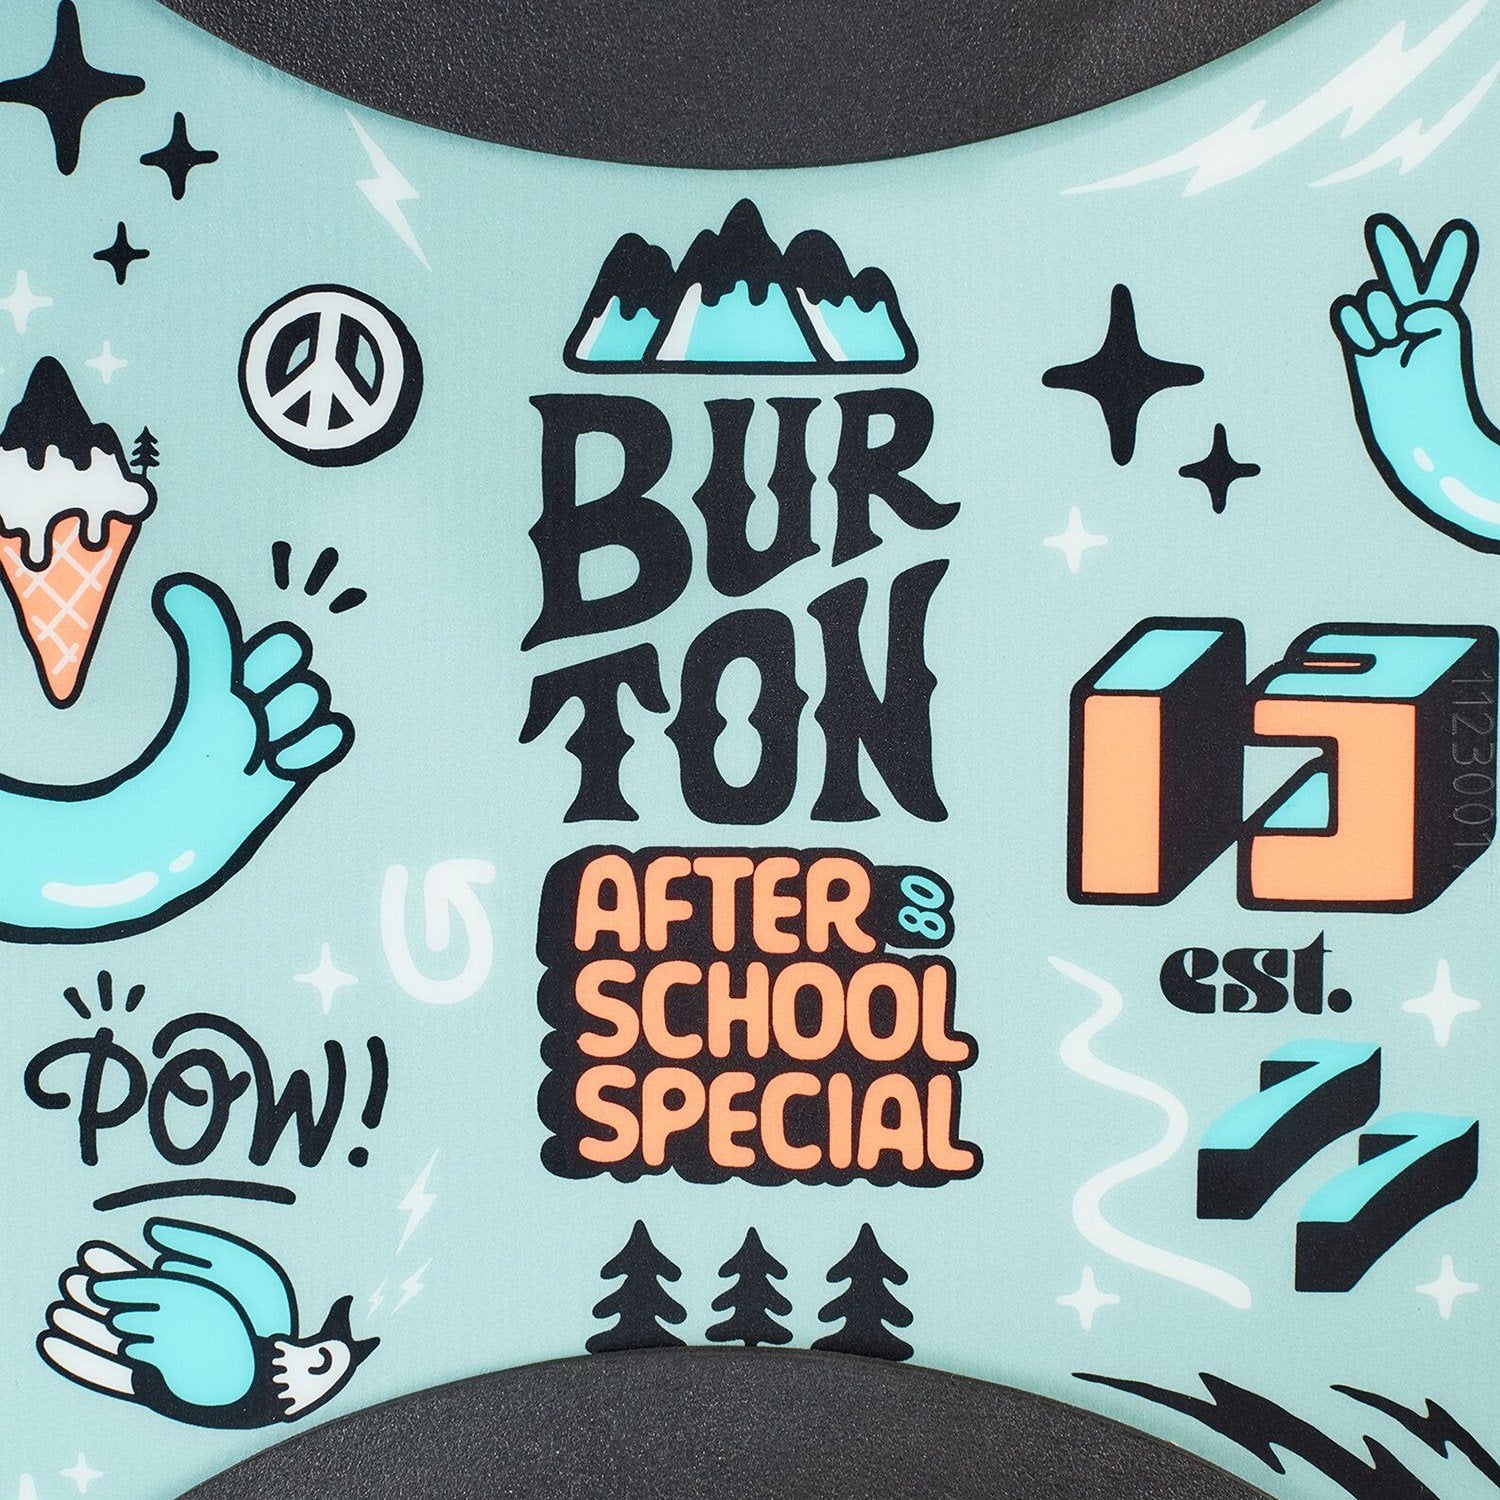 Burton 24 After School Special – The Cutting Edge